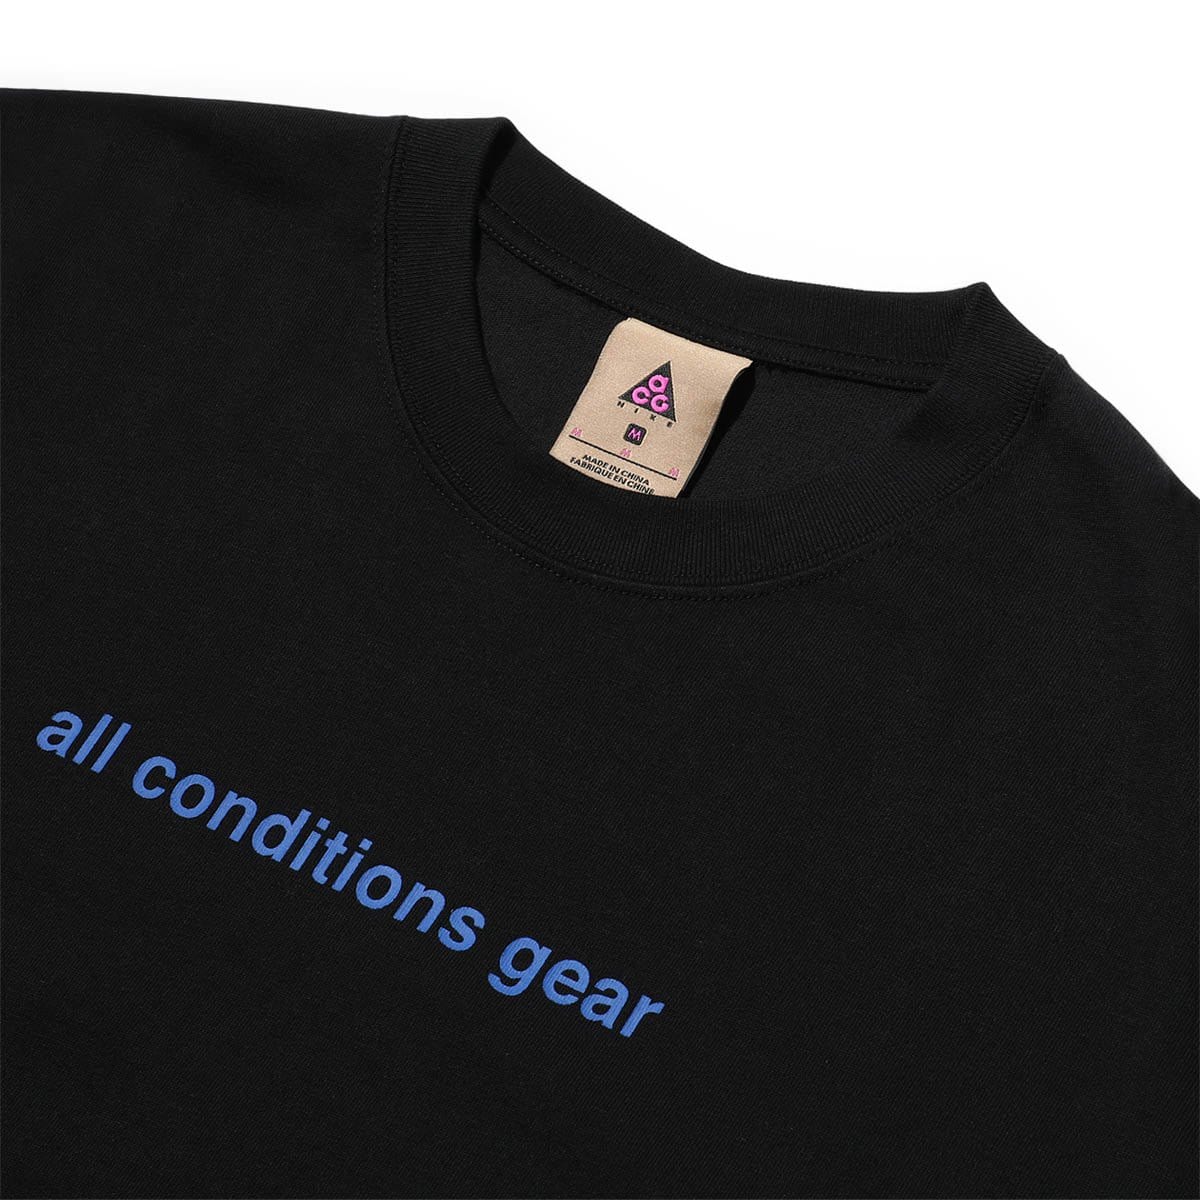 all conditions gear t shirt